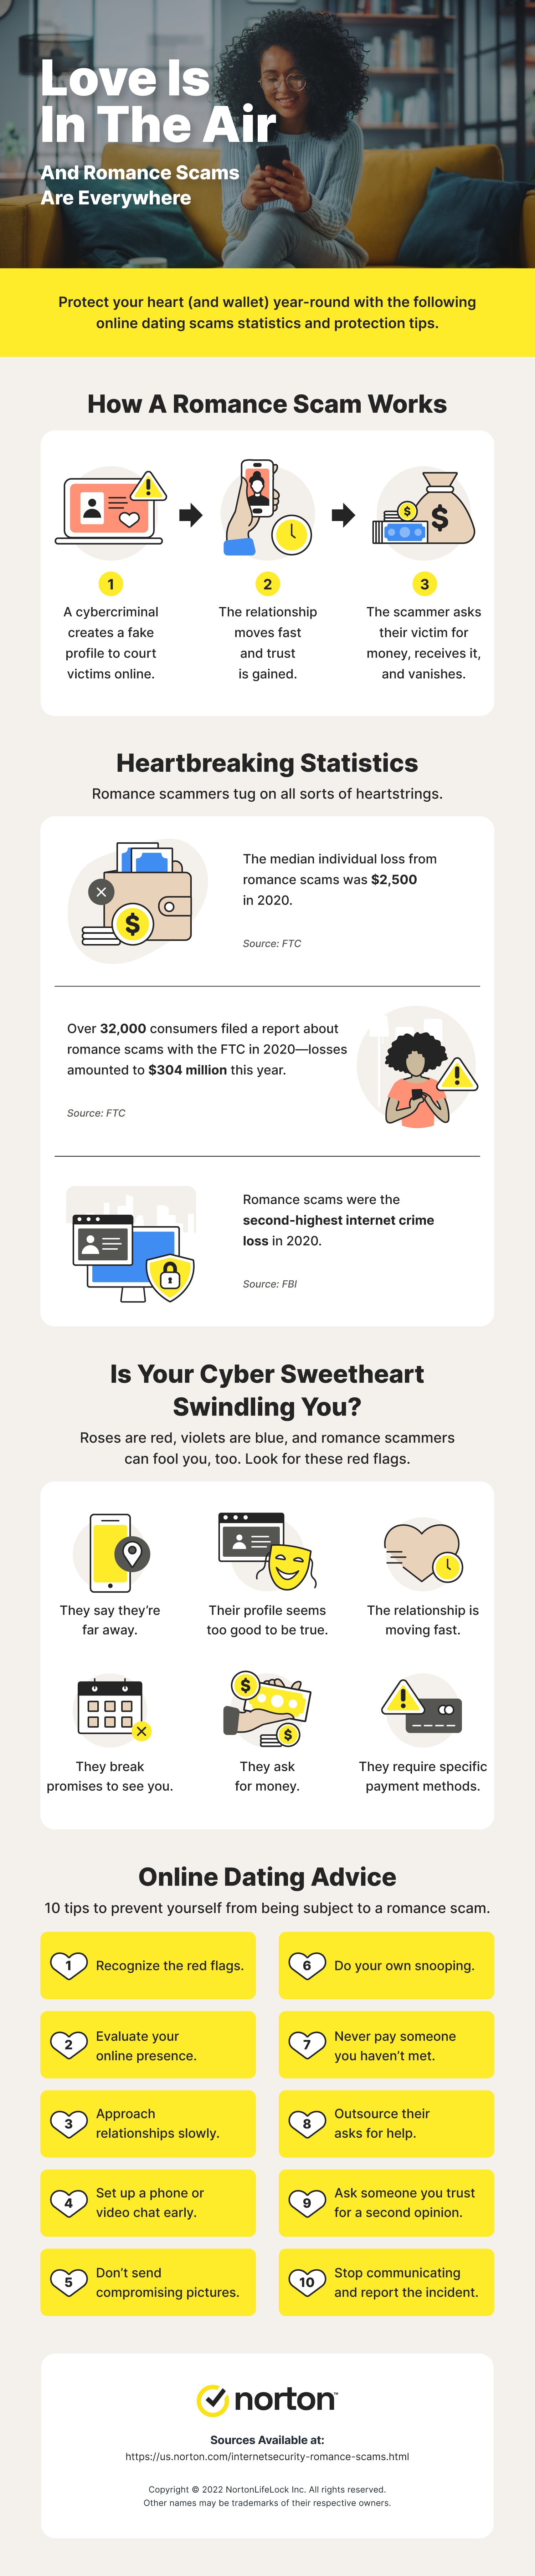 An infographic overviews the importance of looking out for romance scams while dating online, detailing eye-opening romance scam statistics, how romance scams work in addition to signs you may be dealing with a romance scammer. 